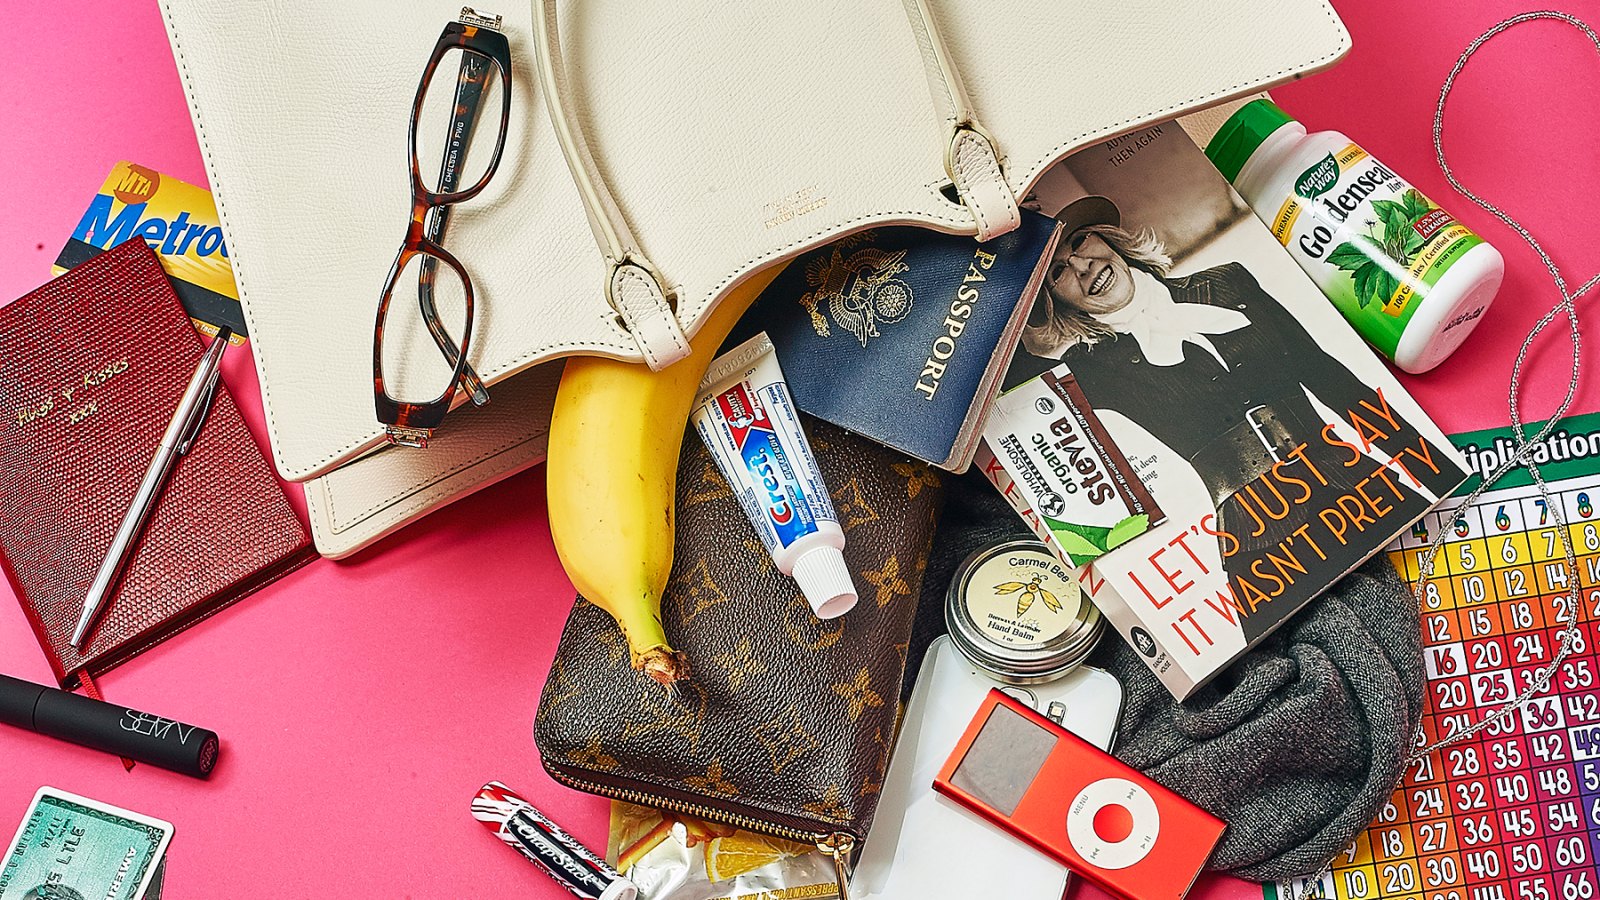 Find out what's in Molly Shannon's bag